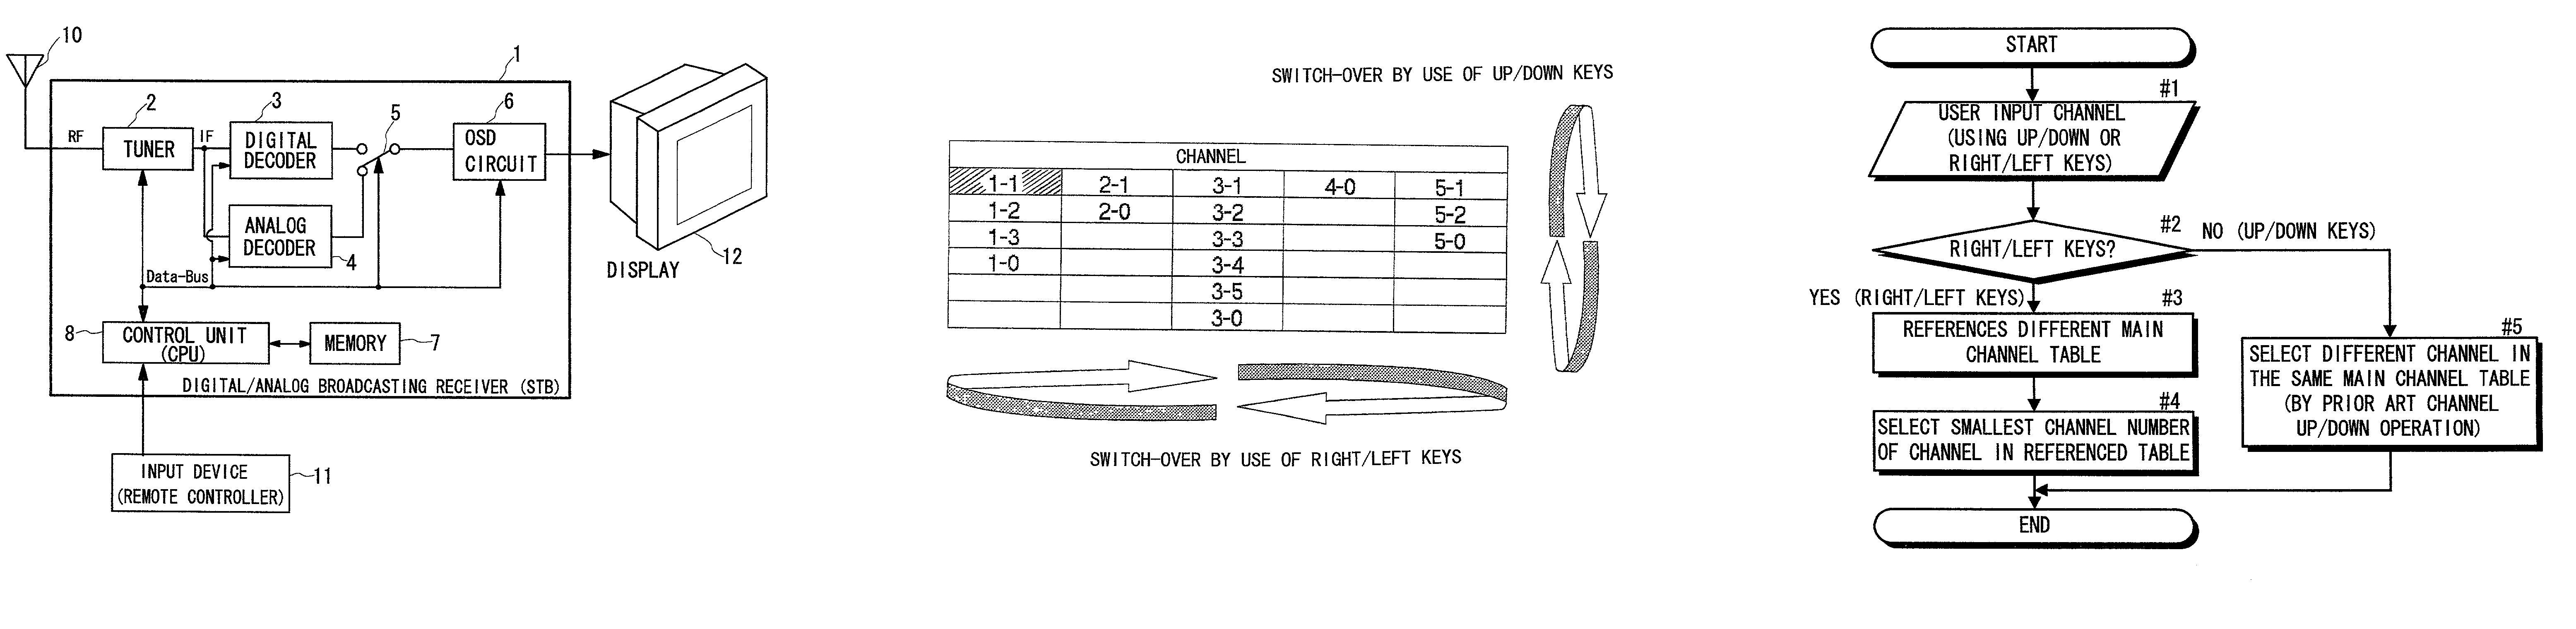 Channel selection device used in digital/analog broadcasting receiver